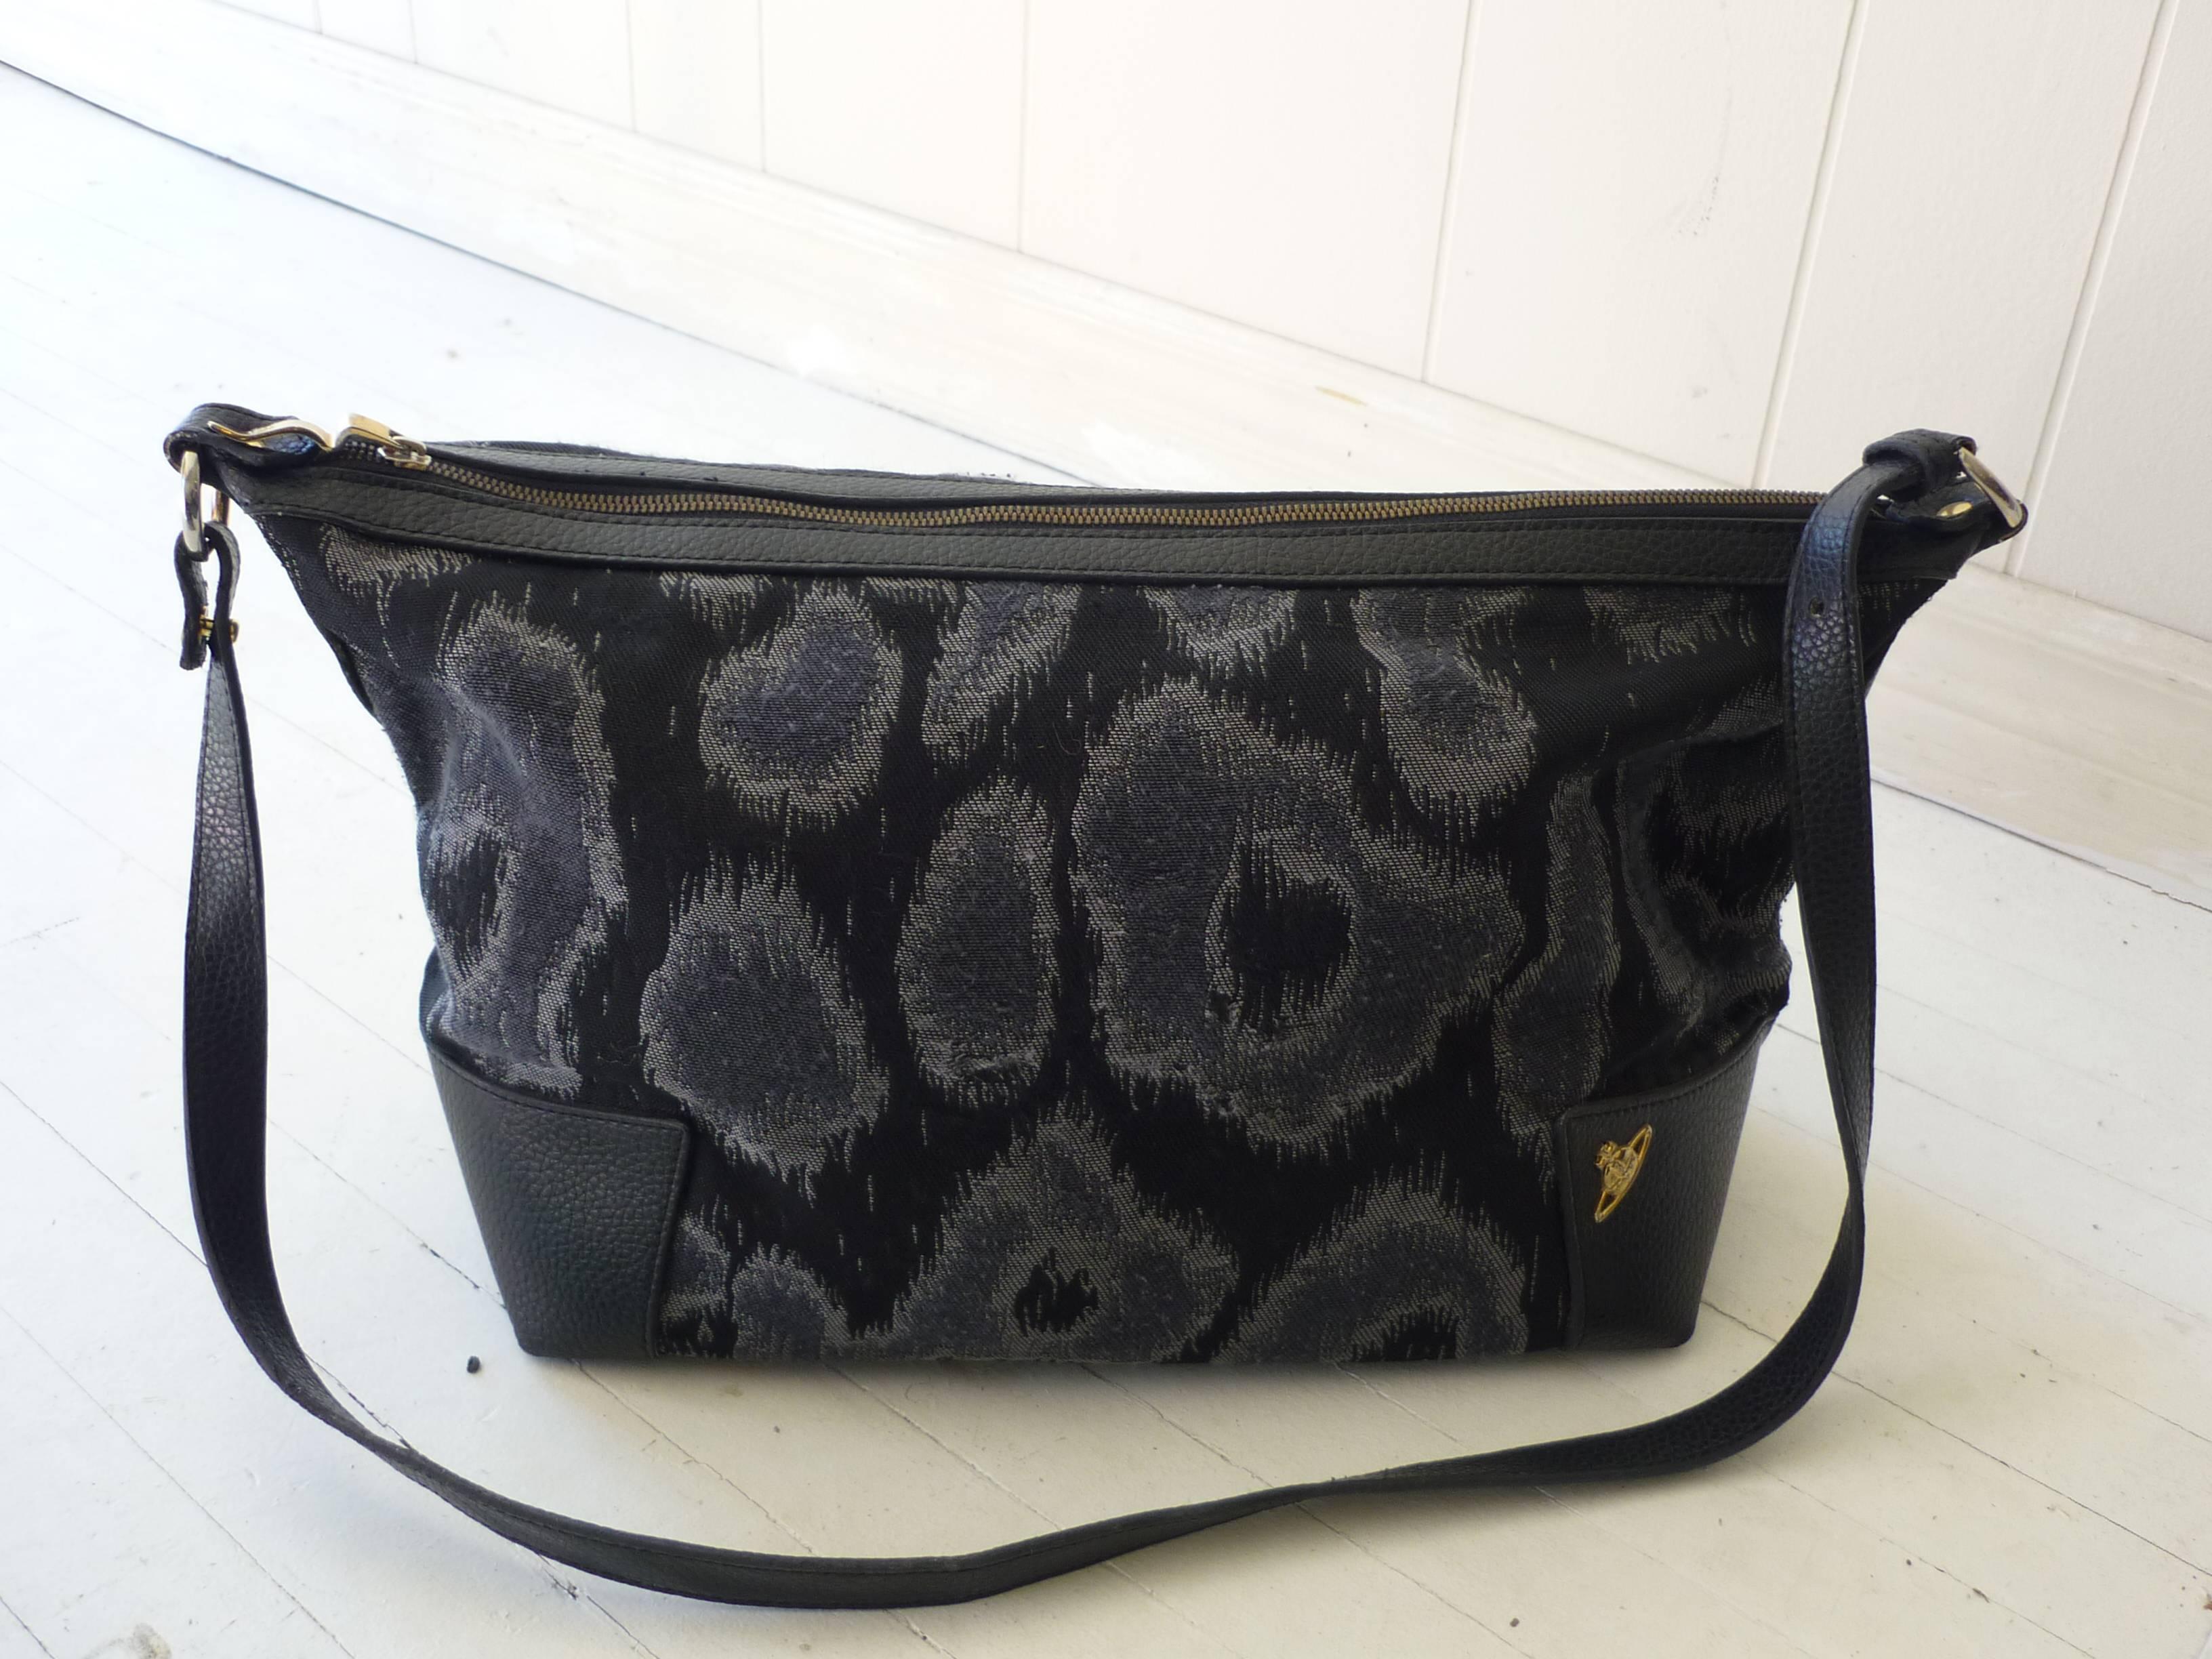 A hobo crossbody and a larger long strap bag, black and grey Toulon print and black and purples Toulon Argyle print. Both have the signature orb logo hardware and zipped inside pockets.

I have declared them in good condition as the smaller bag's